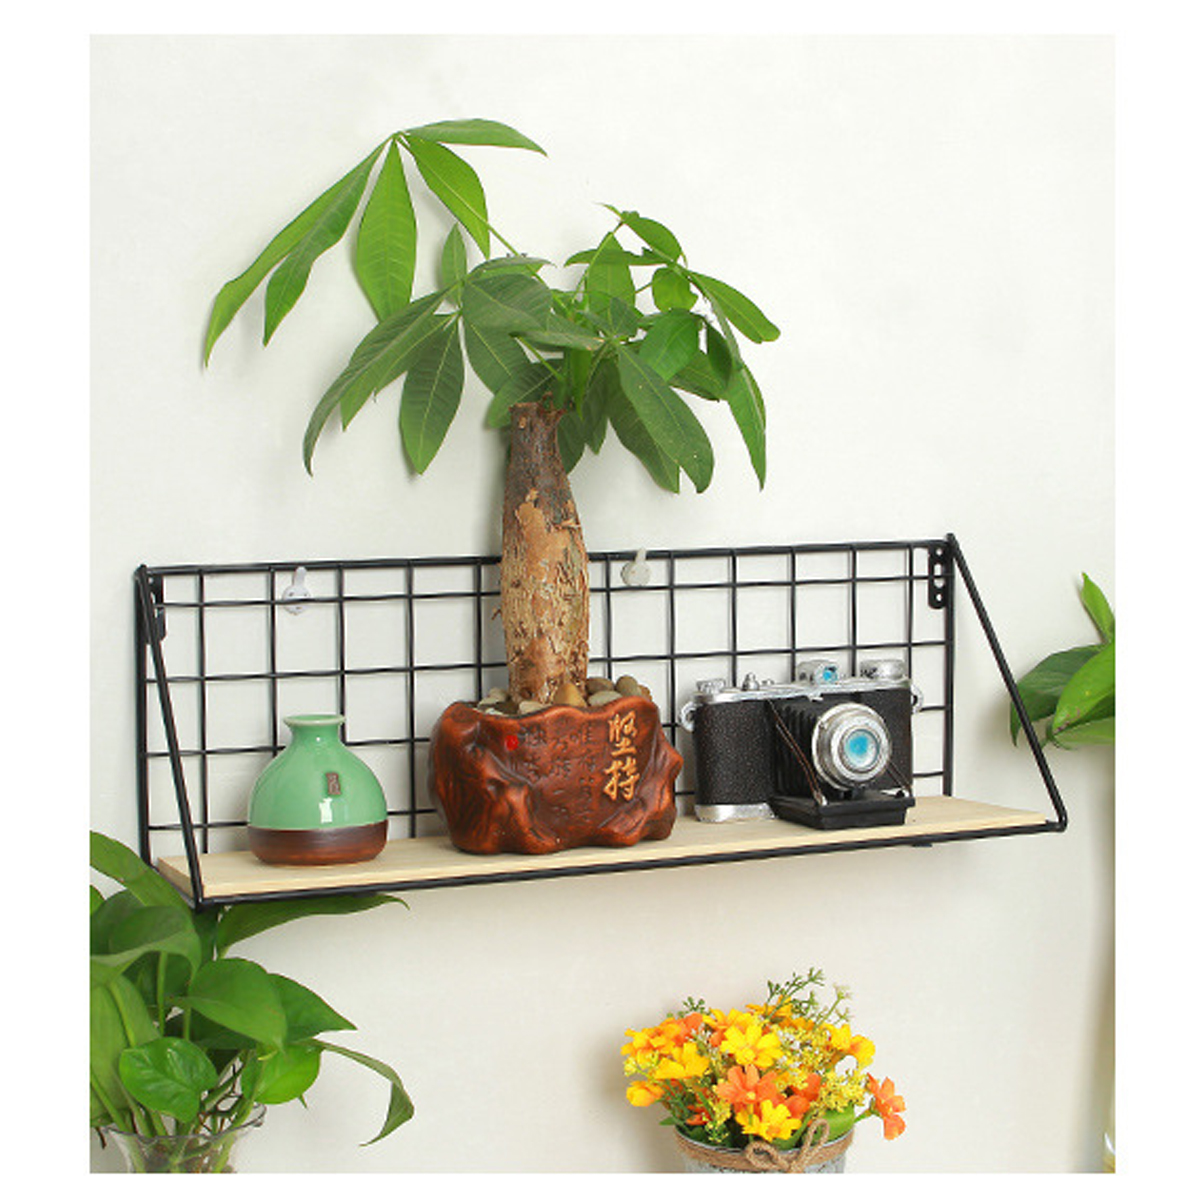 Find Fashion Wooden Iron Storage Holder Home Storage Shelf Wall Hanging Storage Box for Sale on Gipsybee.com with cryptocurrencies